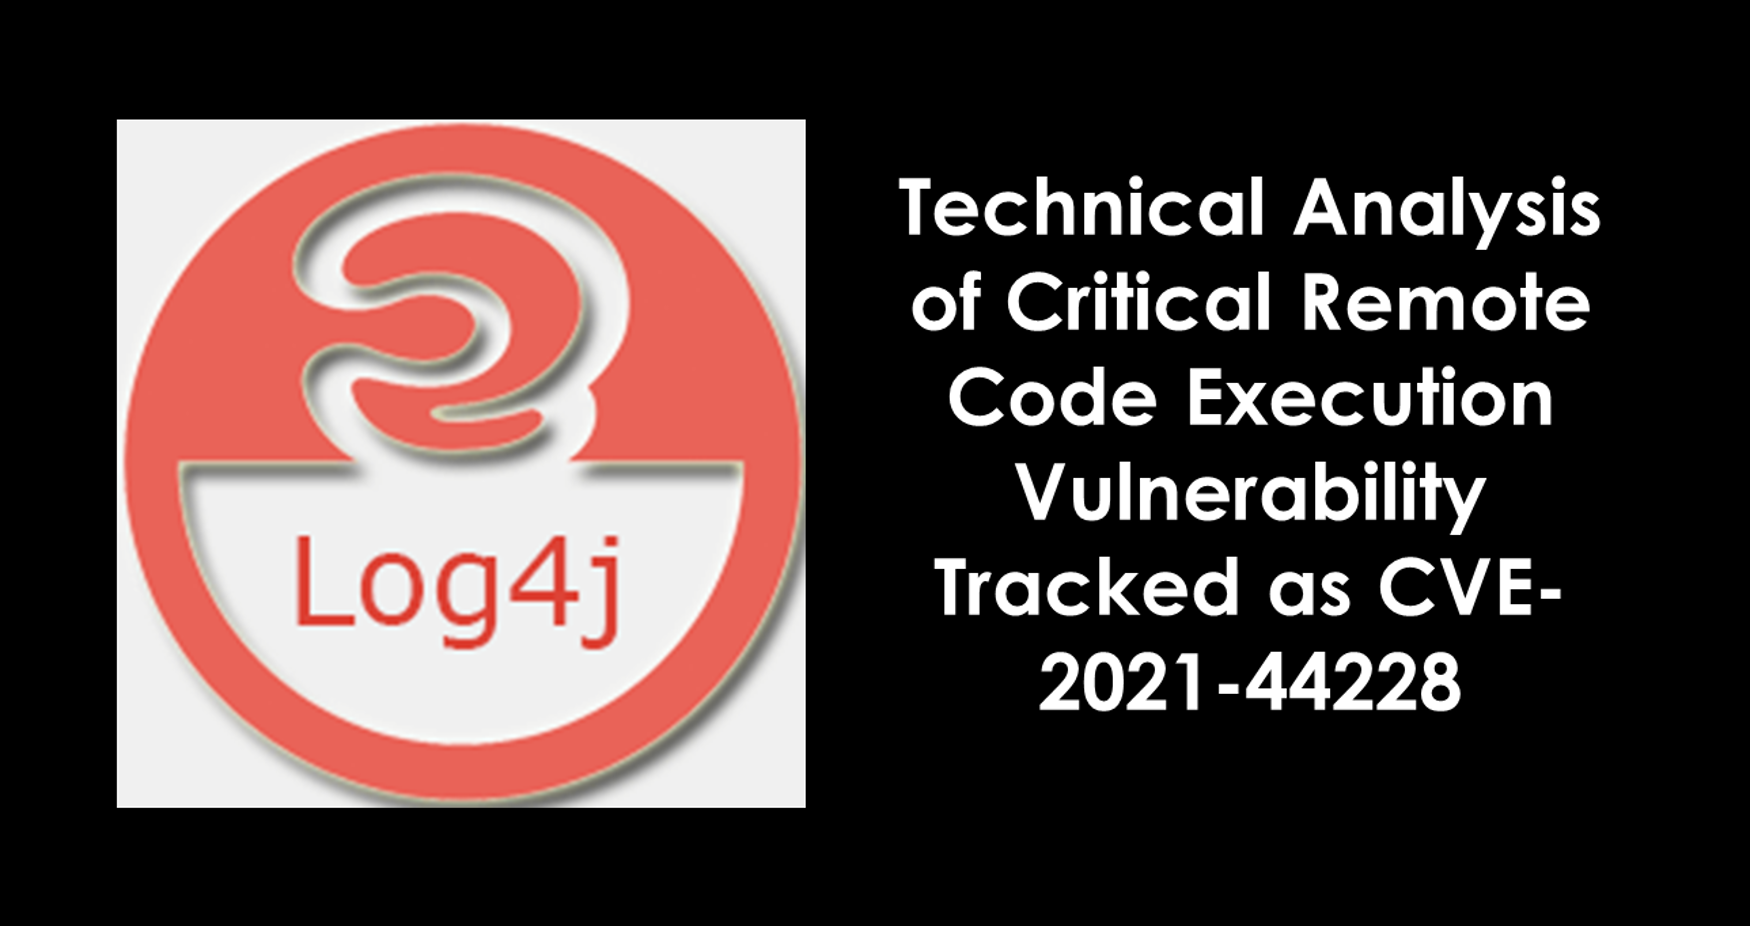 Apache Log4j – Technical Analysis of Critical Remote Code Execution Vulnerability Tracked as CVE-2021-44228